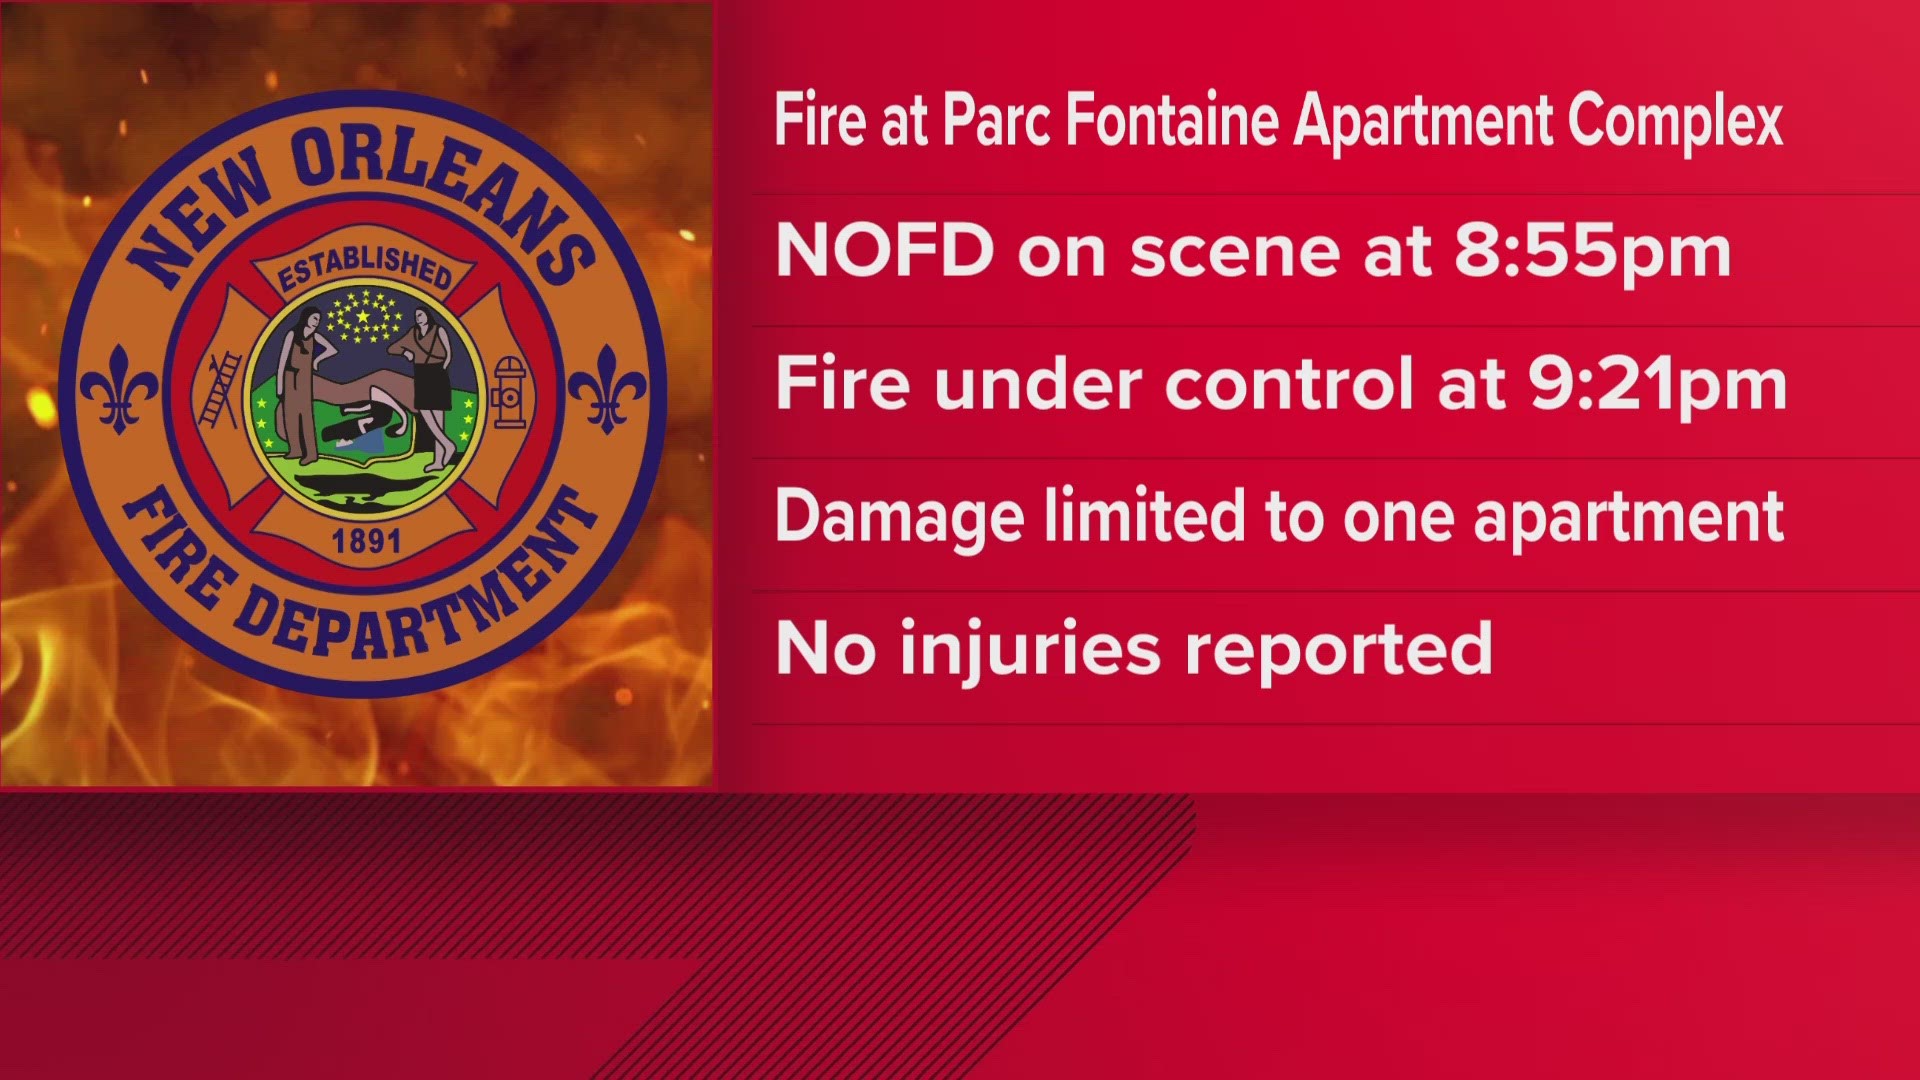 According to the New Orleans Fire Department, fire crews arrived on the scene at 8:55 pm to find a fire at an apartment in the 3100 block of Rue Parc Fontaine.